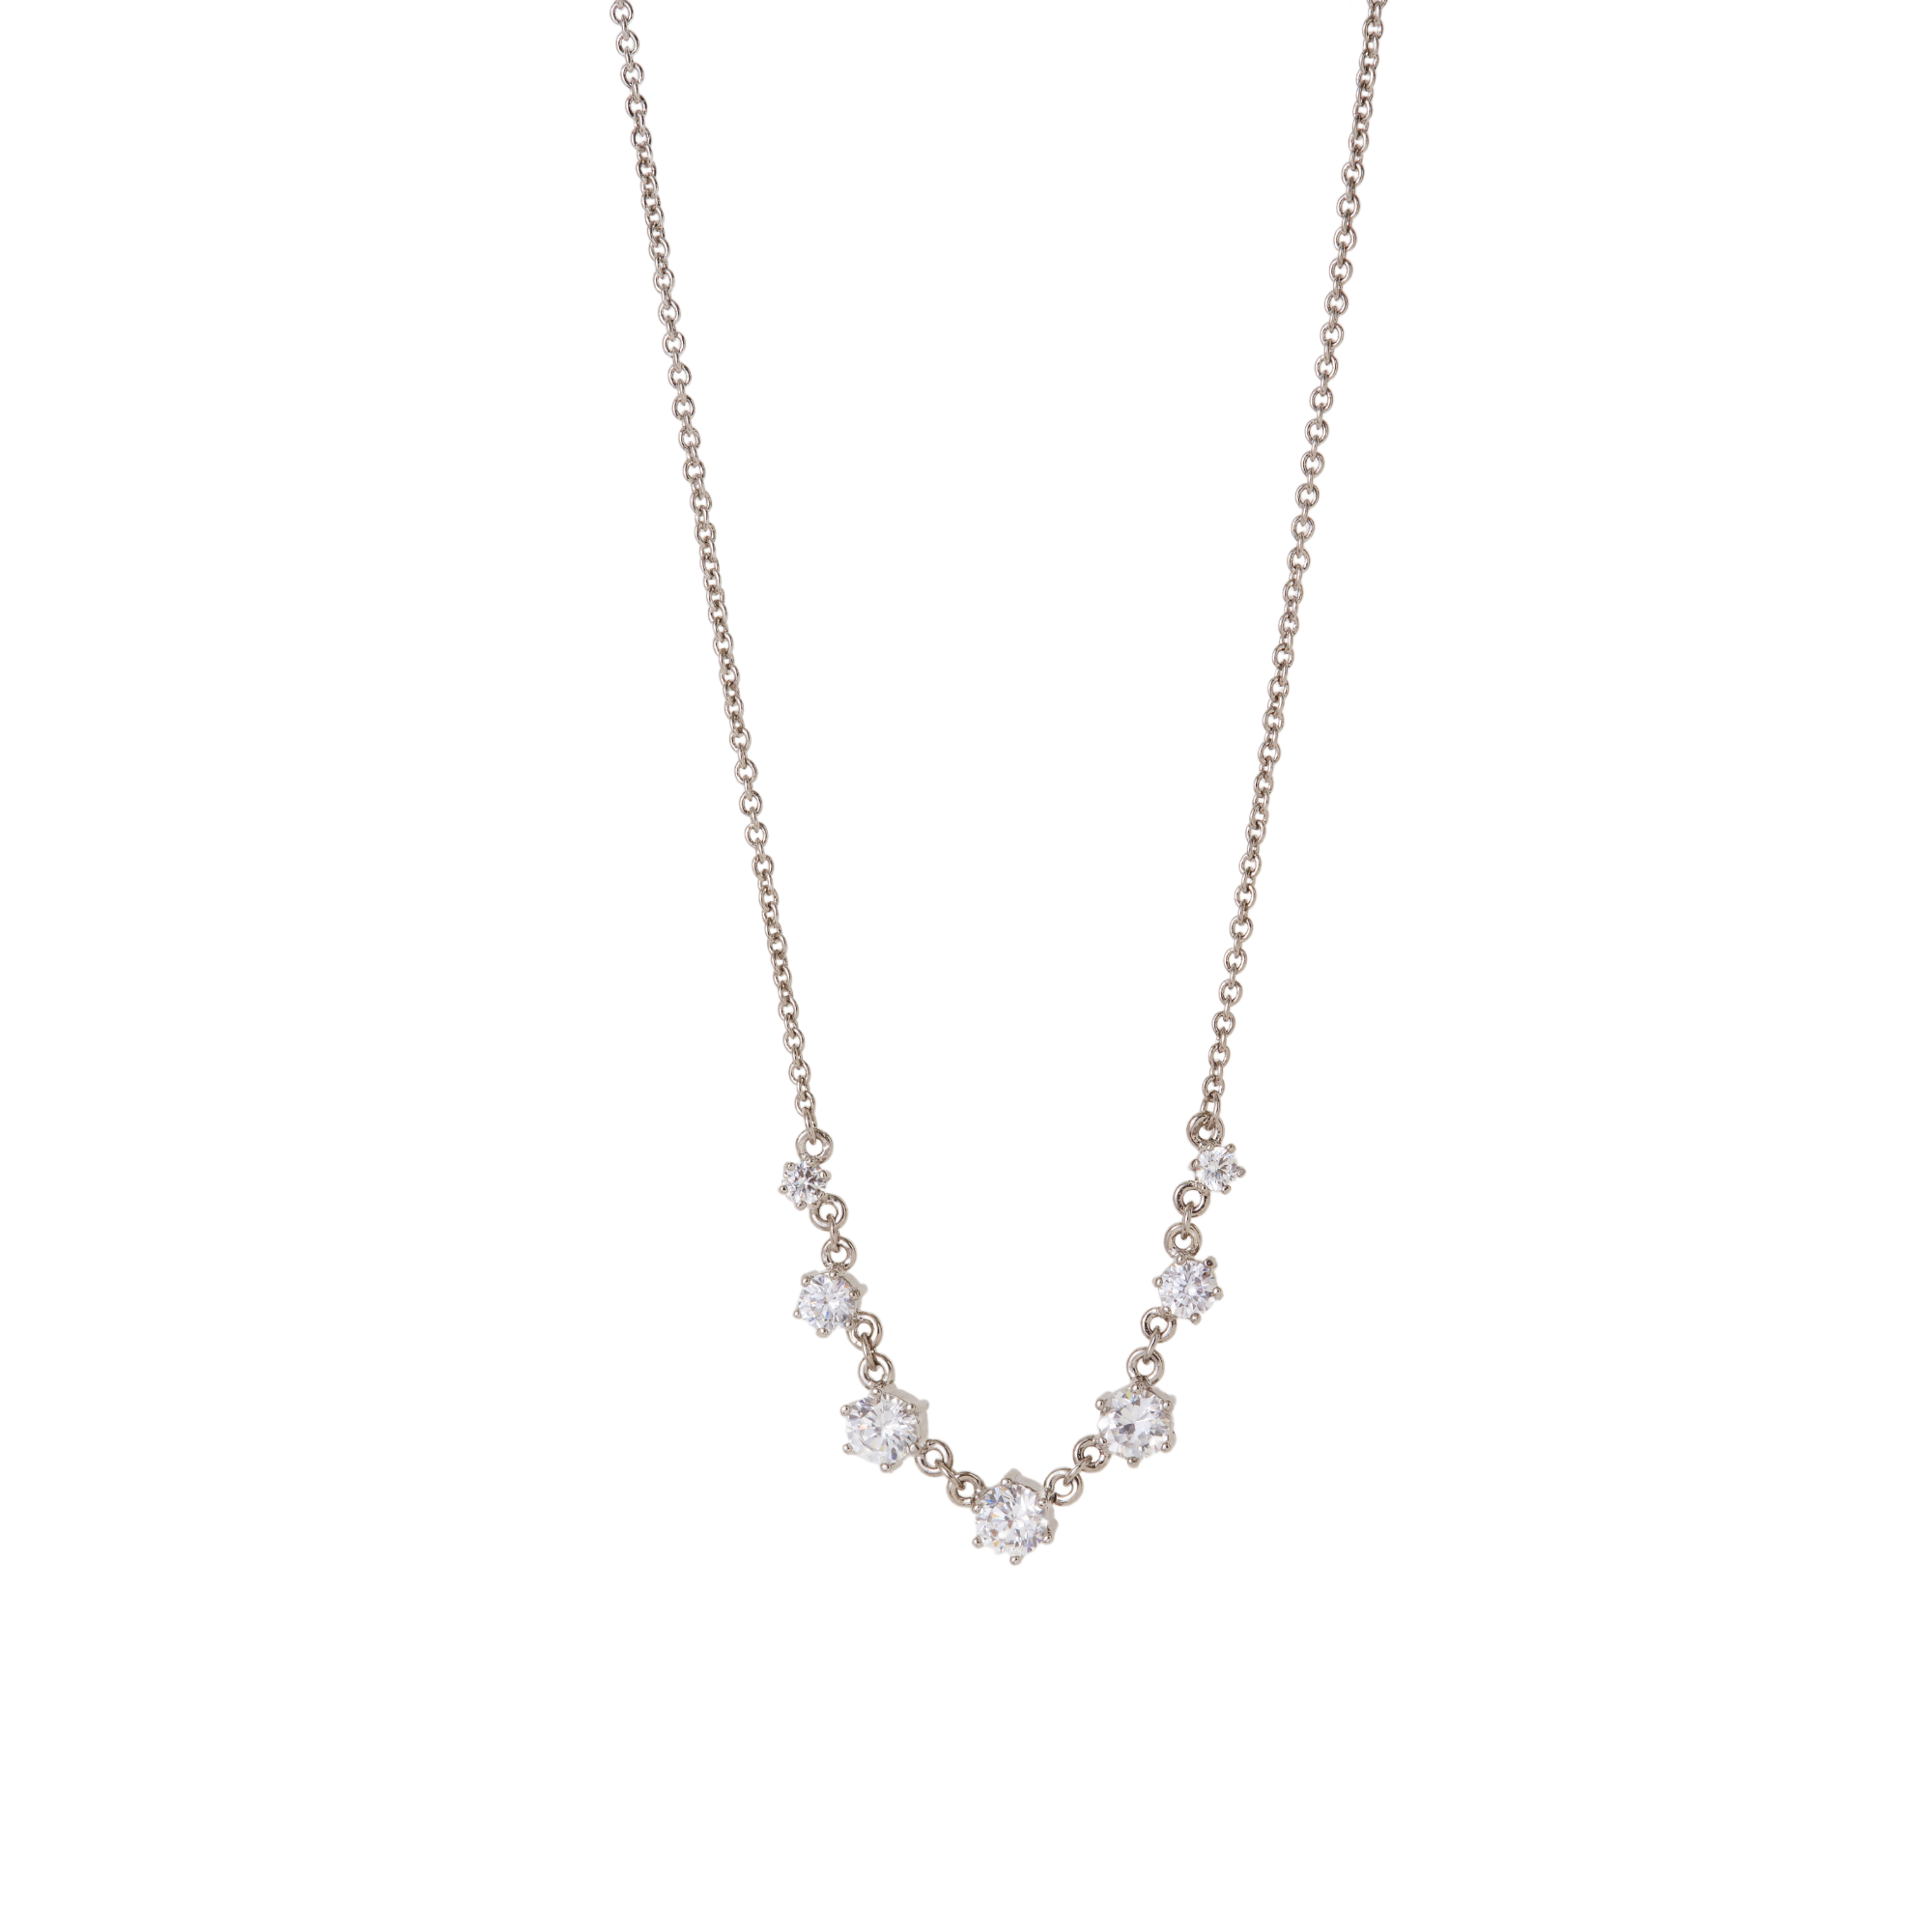 THE CZ ROSE NECKLACE